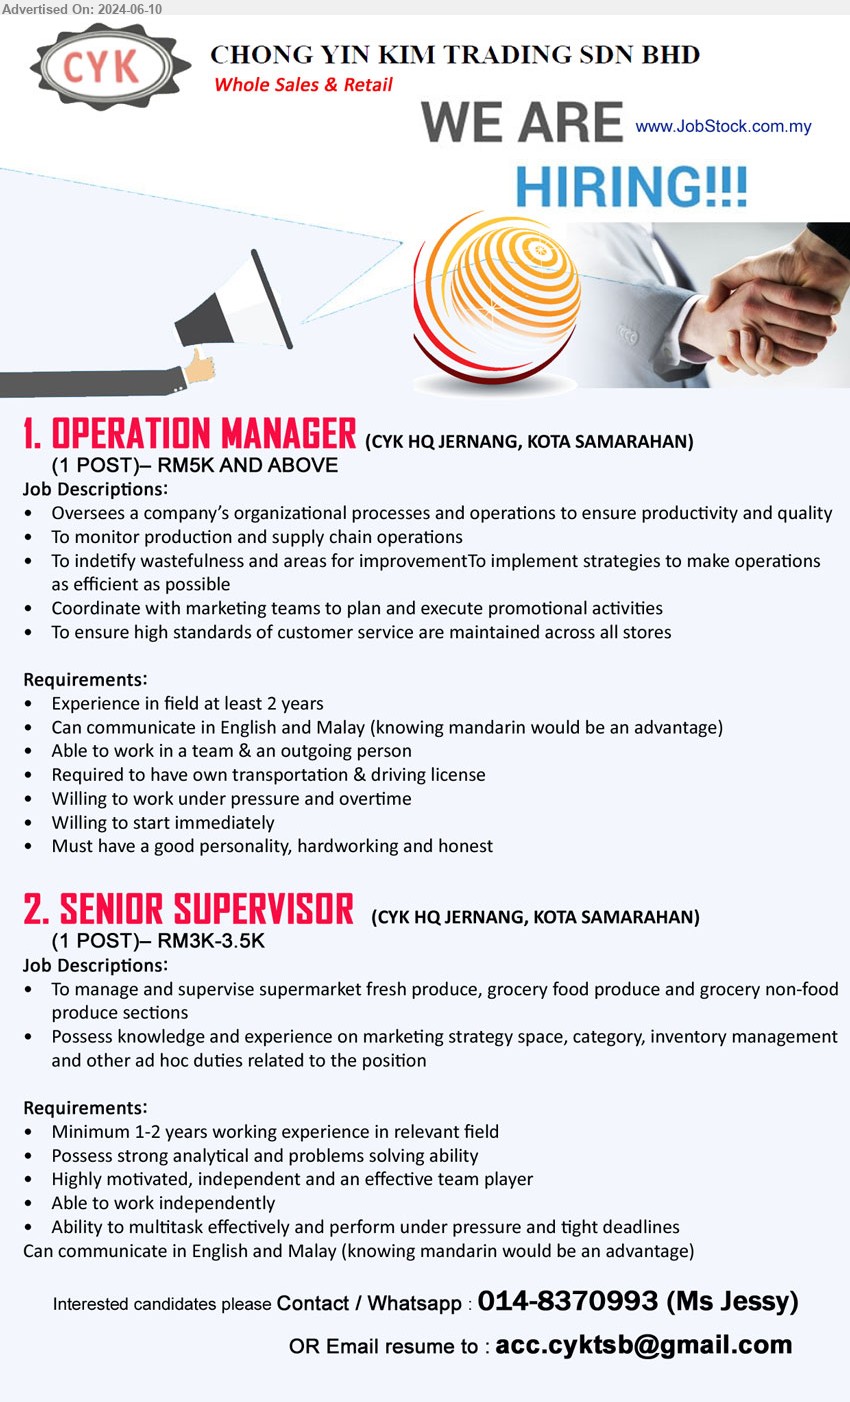 CHONG YIN KIM TRADING SDN BHD - 1. OPERATION MANAGER (Kota Samarahan), RM5K AND ABOVE, Experience in field at least 2 years, Can communicate in English and Malay (knowing mandarin would be an advantage)...
2. SENIOR SUPERVISOR (Kota Samarahan), 2 posts, RM3K-3.5K, Minimum 1-2 years working experience in relevant field, Possess strong analytical and problems solving ability...
Contact / Whatsapp : 014-8370993 (Ms Jessy) / Email resume to ...